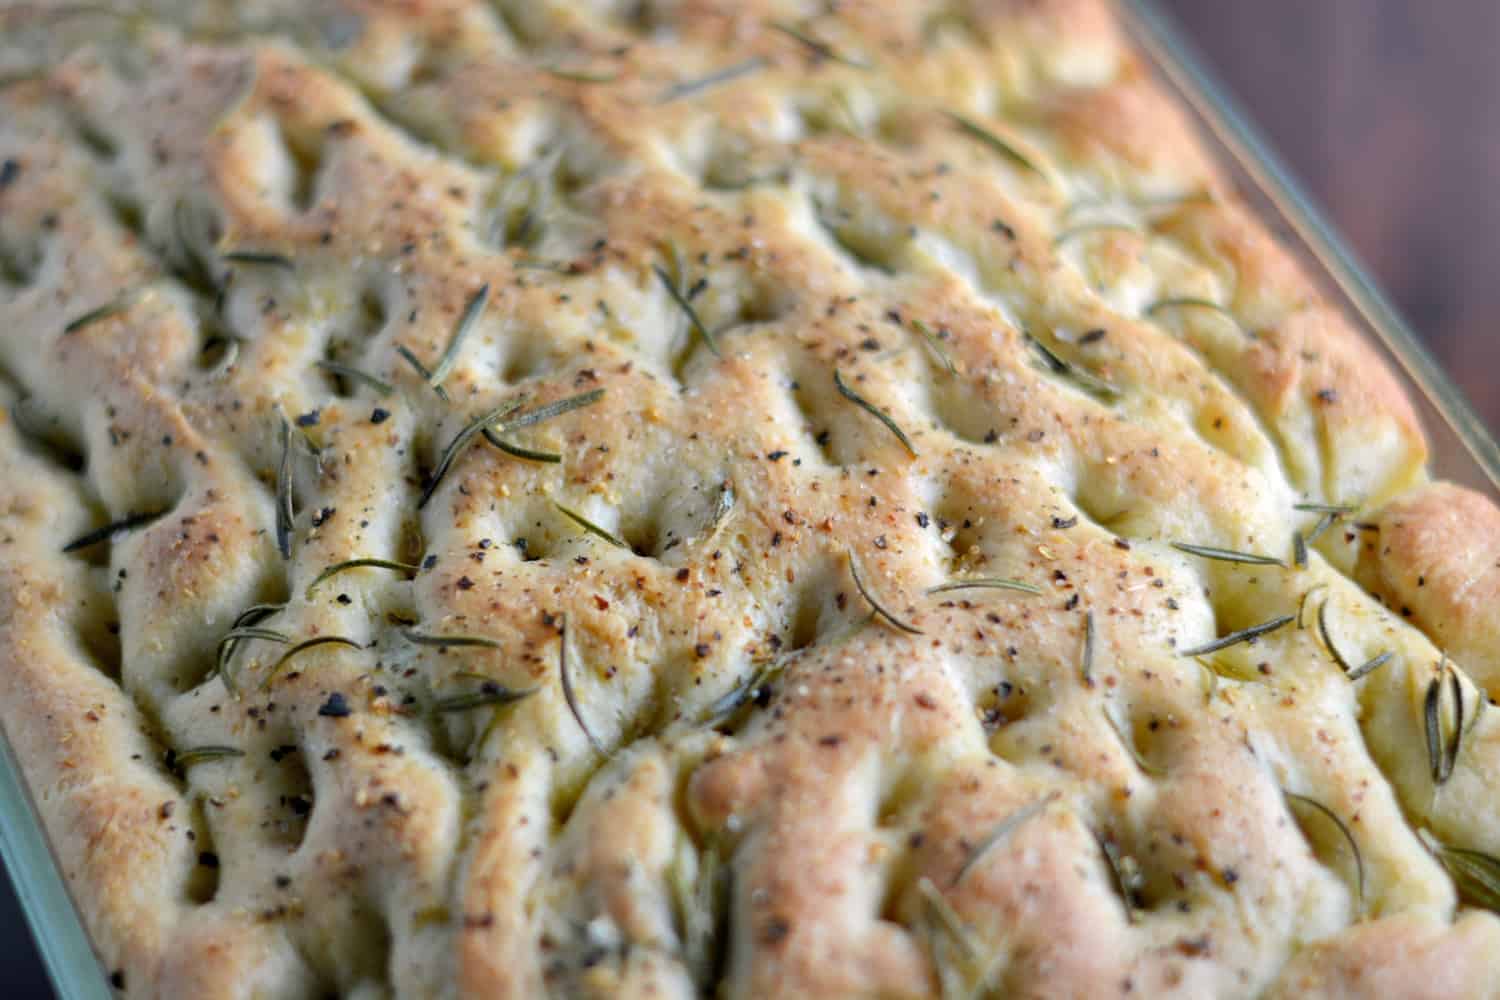 Thick and Chewy Focaccia Bread - a super easy for the perfect focaccia bread topped with sea salt and herbs.